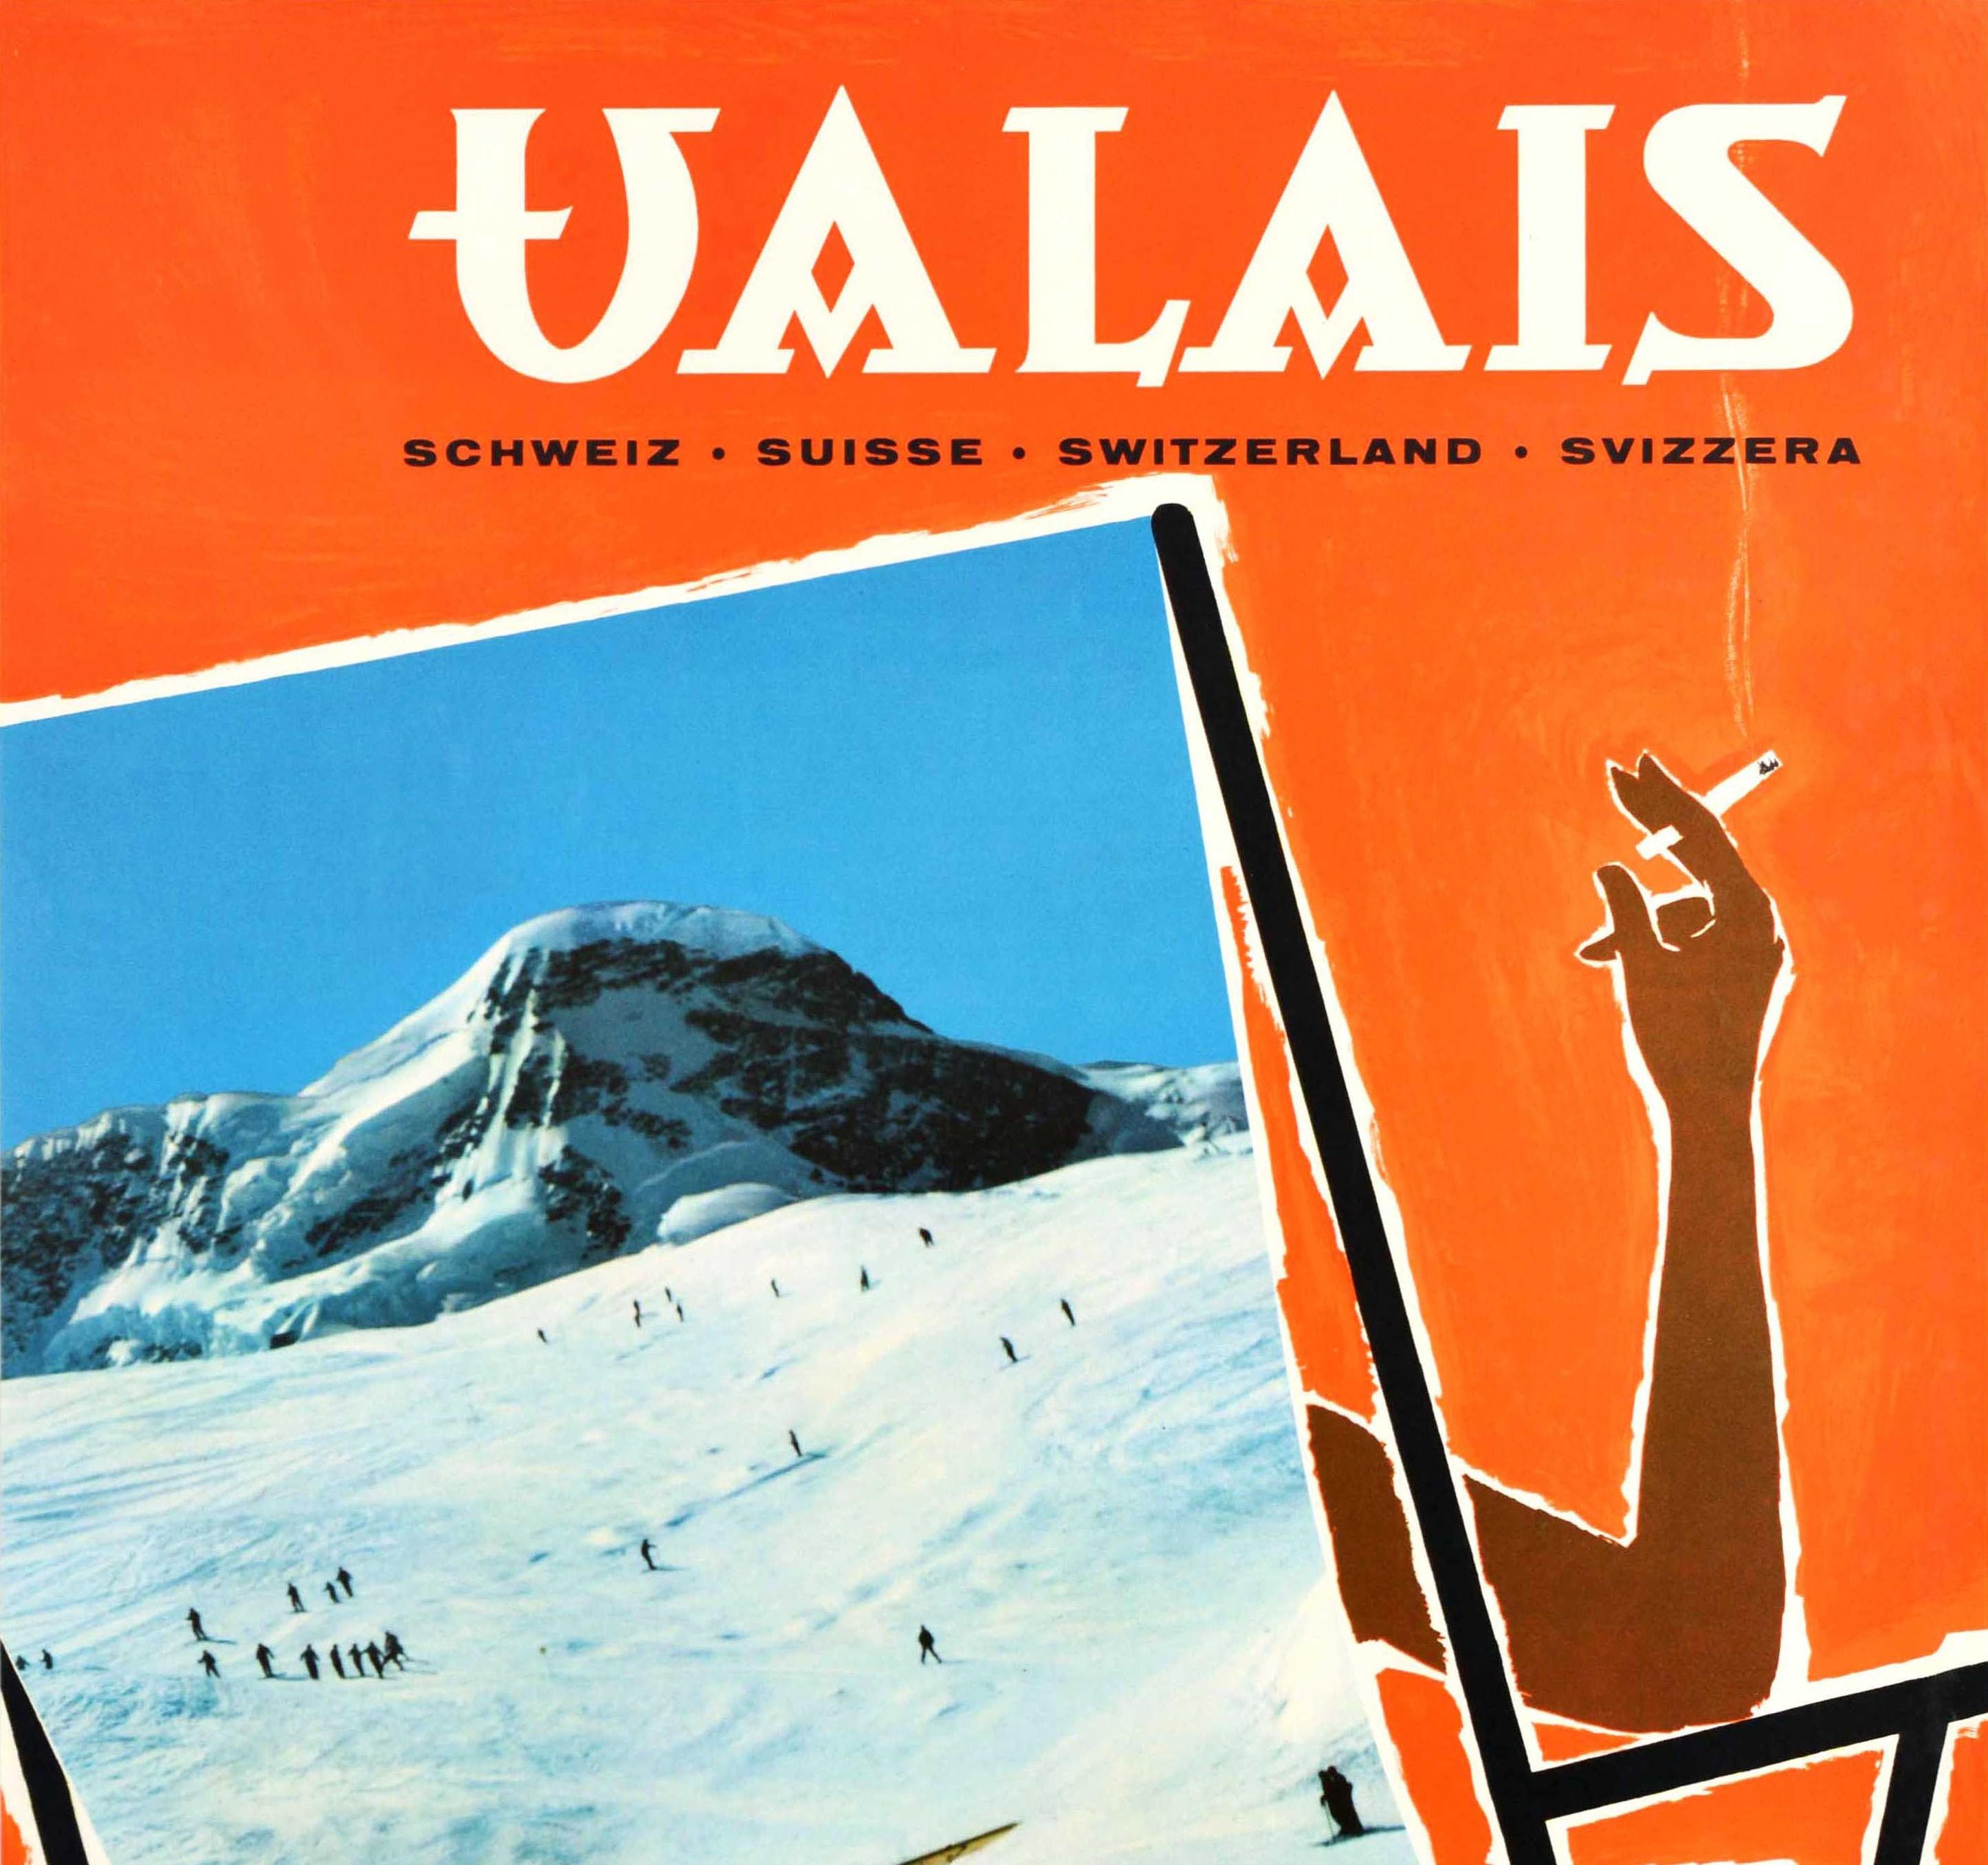 Original vintage skiing poster for the popular Swiss ski resort of Valais Schweiz Suisse Switzerland Svizzera featuring a colourful image of a person relaxing in a deck chair and smoking a cigarette with a photo on the back of the chair of a ski